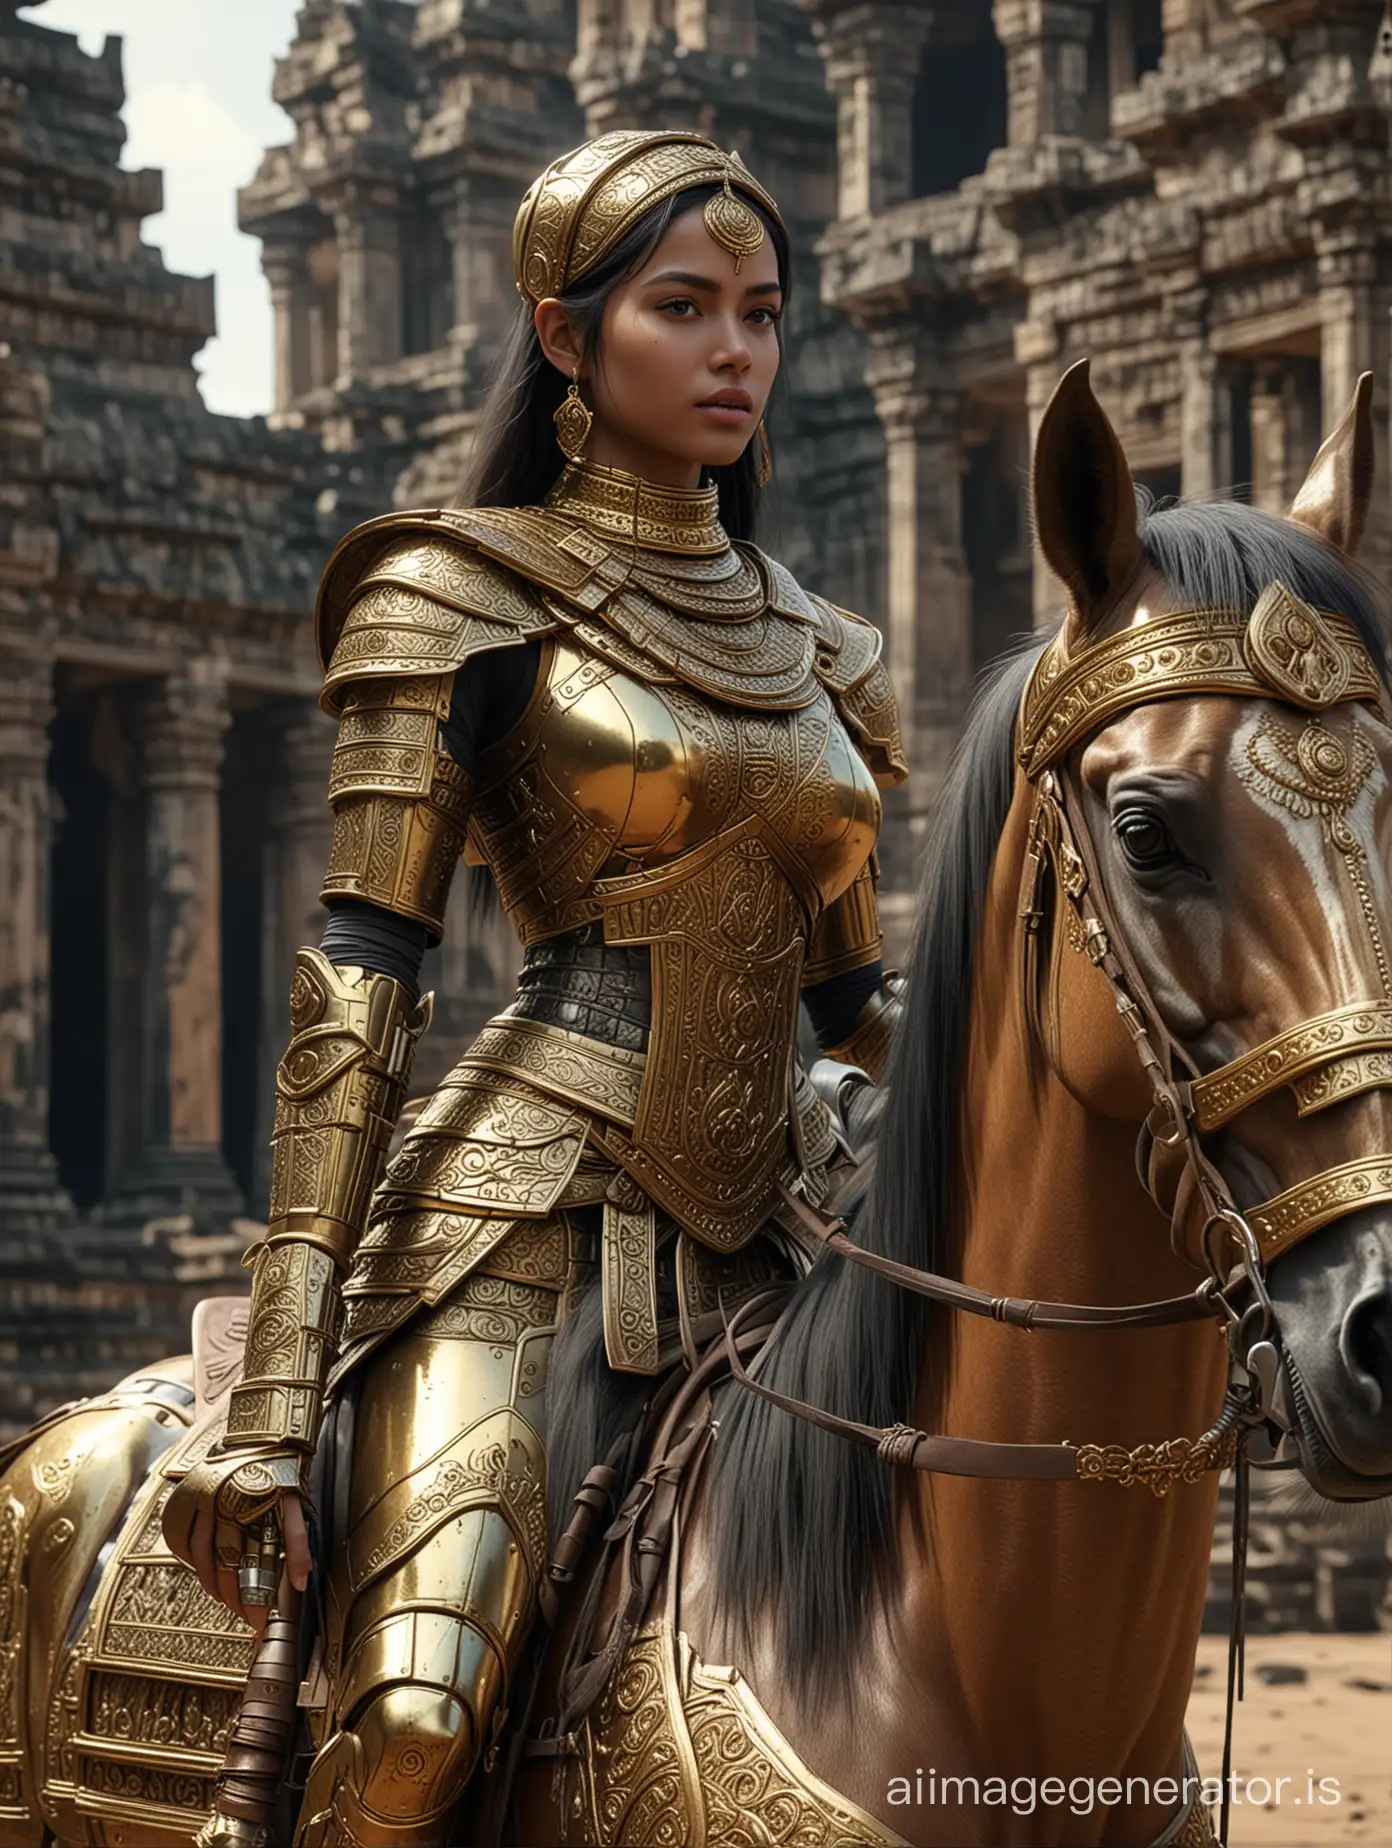 Generate a highly detailed, ultra HD image, 

intelligent Muslim girl robot warrior riding horse in front Angkor Wat, gold colour, thick metal face, hyper realistic, enhanced visualization, 8k, high quality render, insanely detailed, 

with extreme realism and clarity in the facial features. The shot should be a full-body view, capturing every intricate detail.